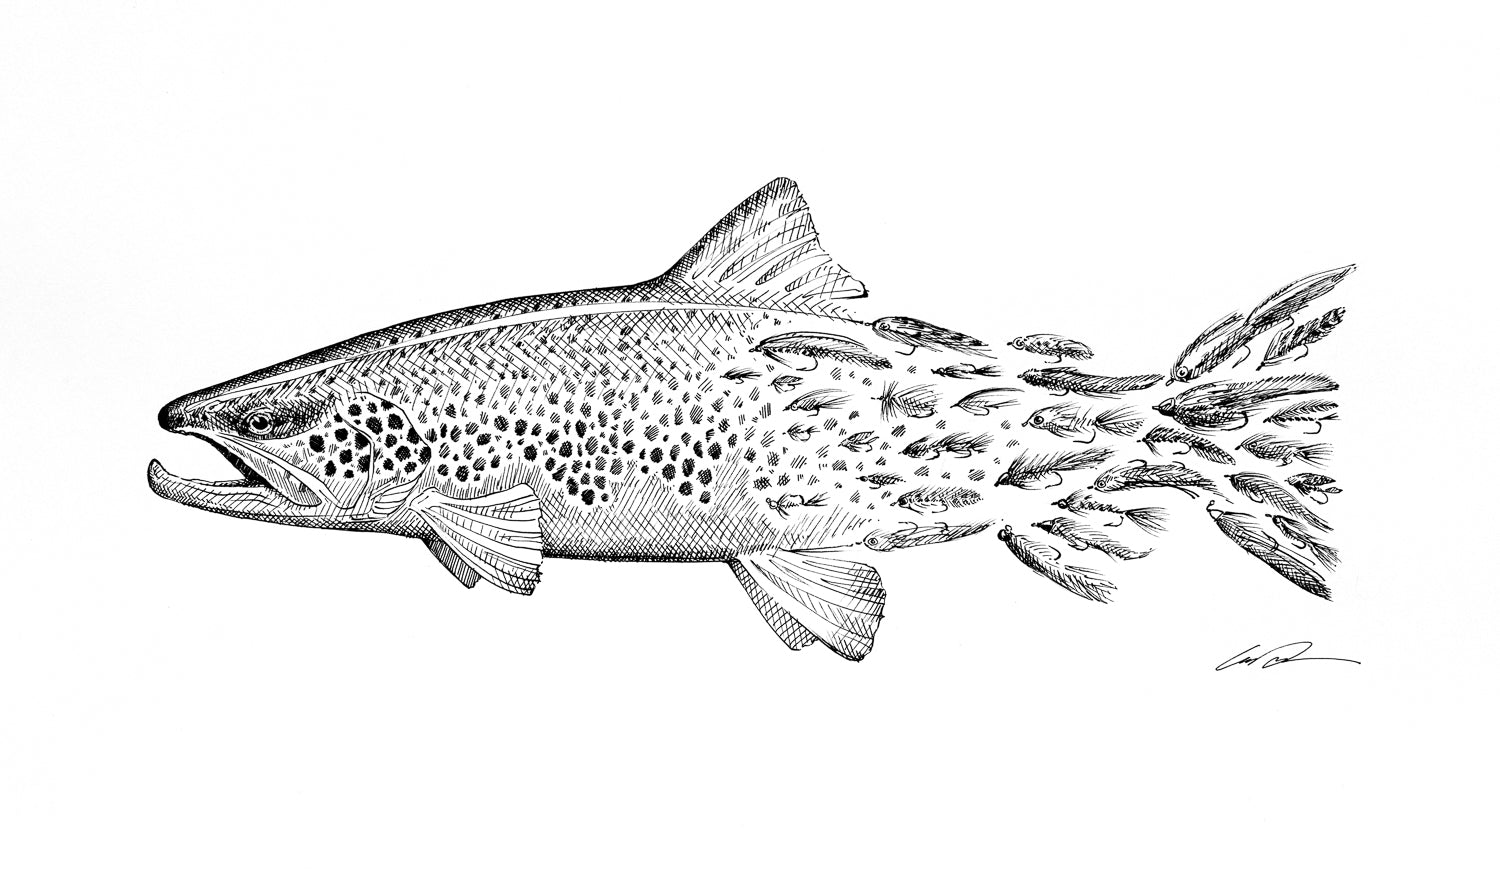 A pen and ink drawing of a brown trout. The spots of the trout fade to flies towards the tail of the fish.